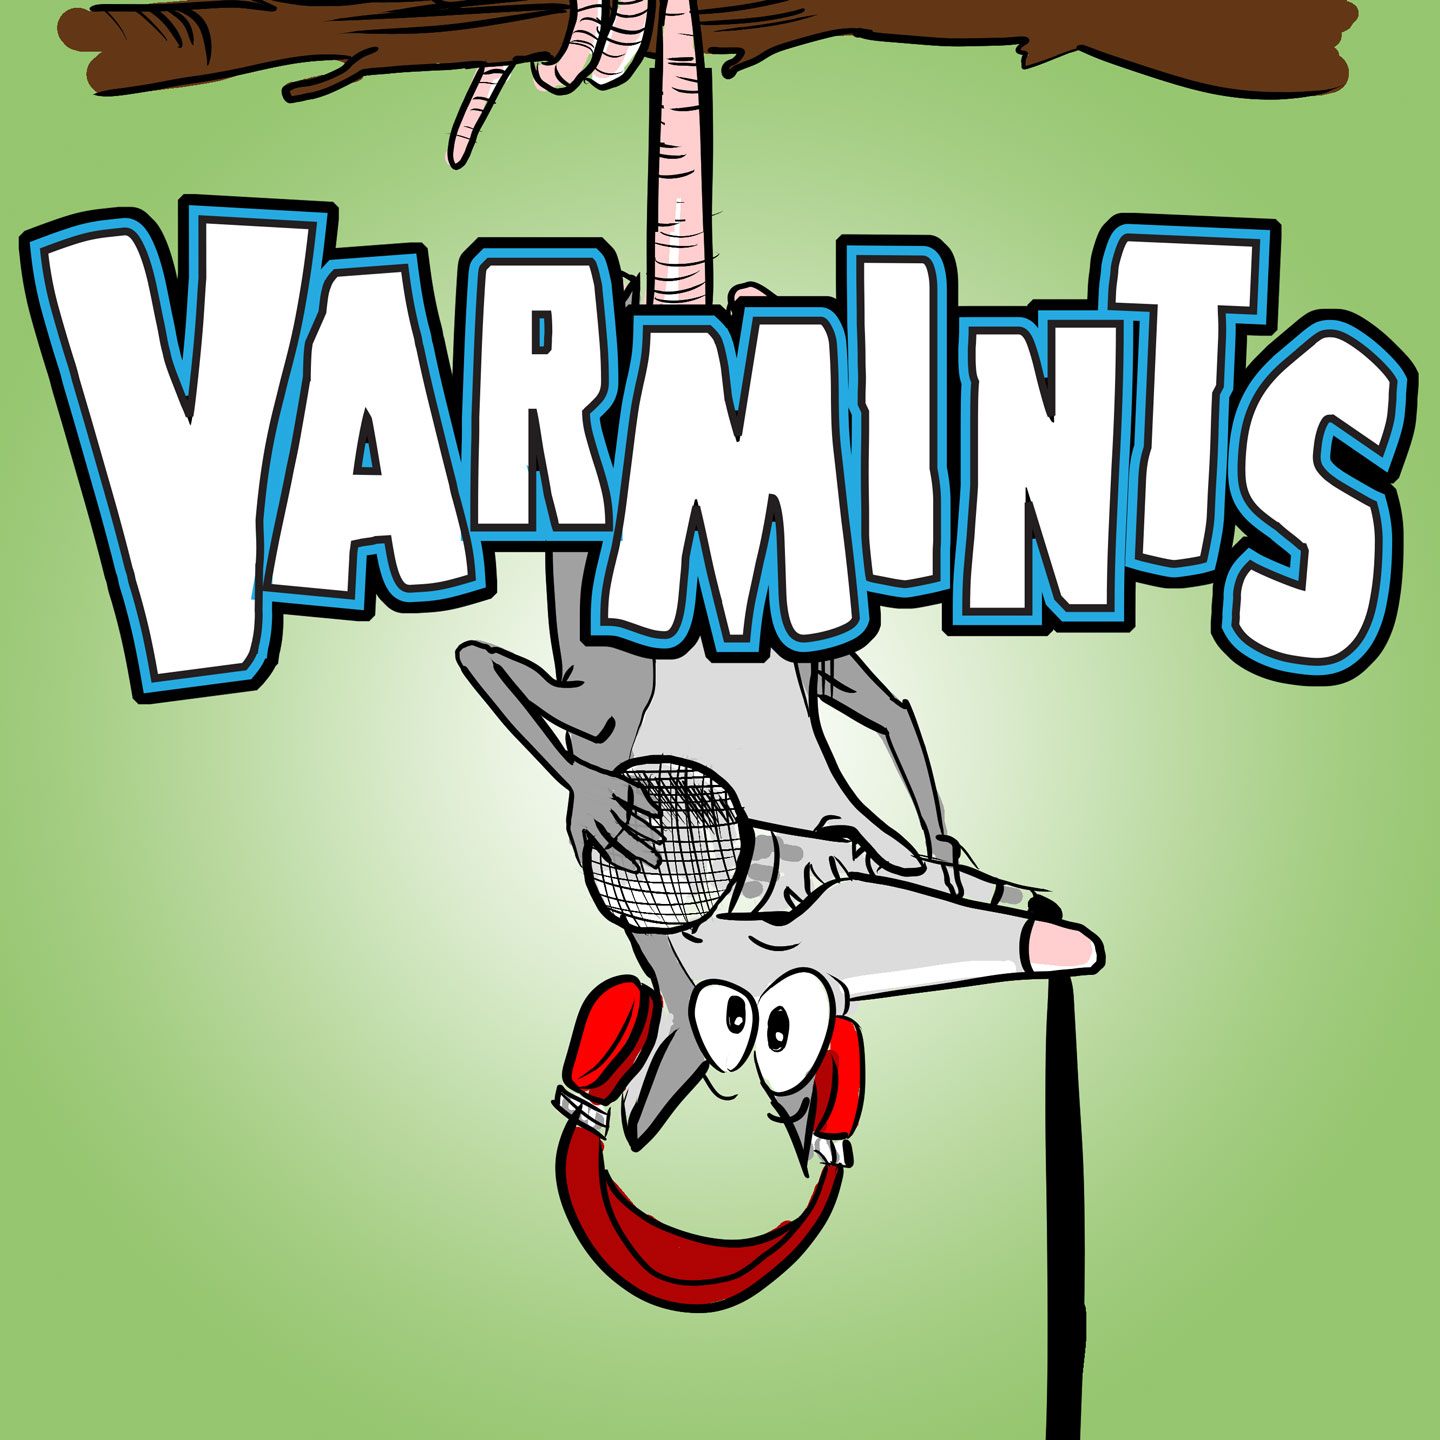 Varmints! (2.0) What's happening, and what is next?